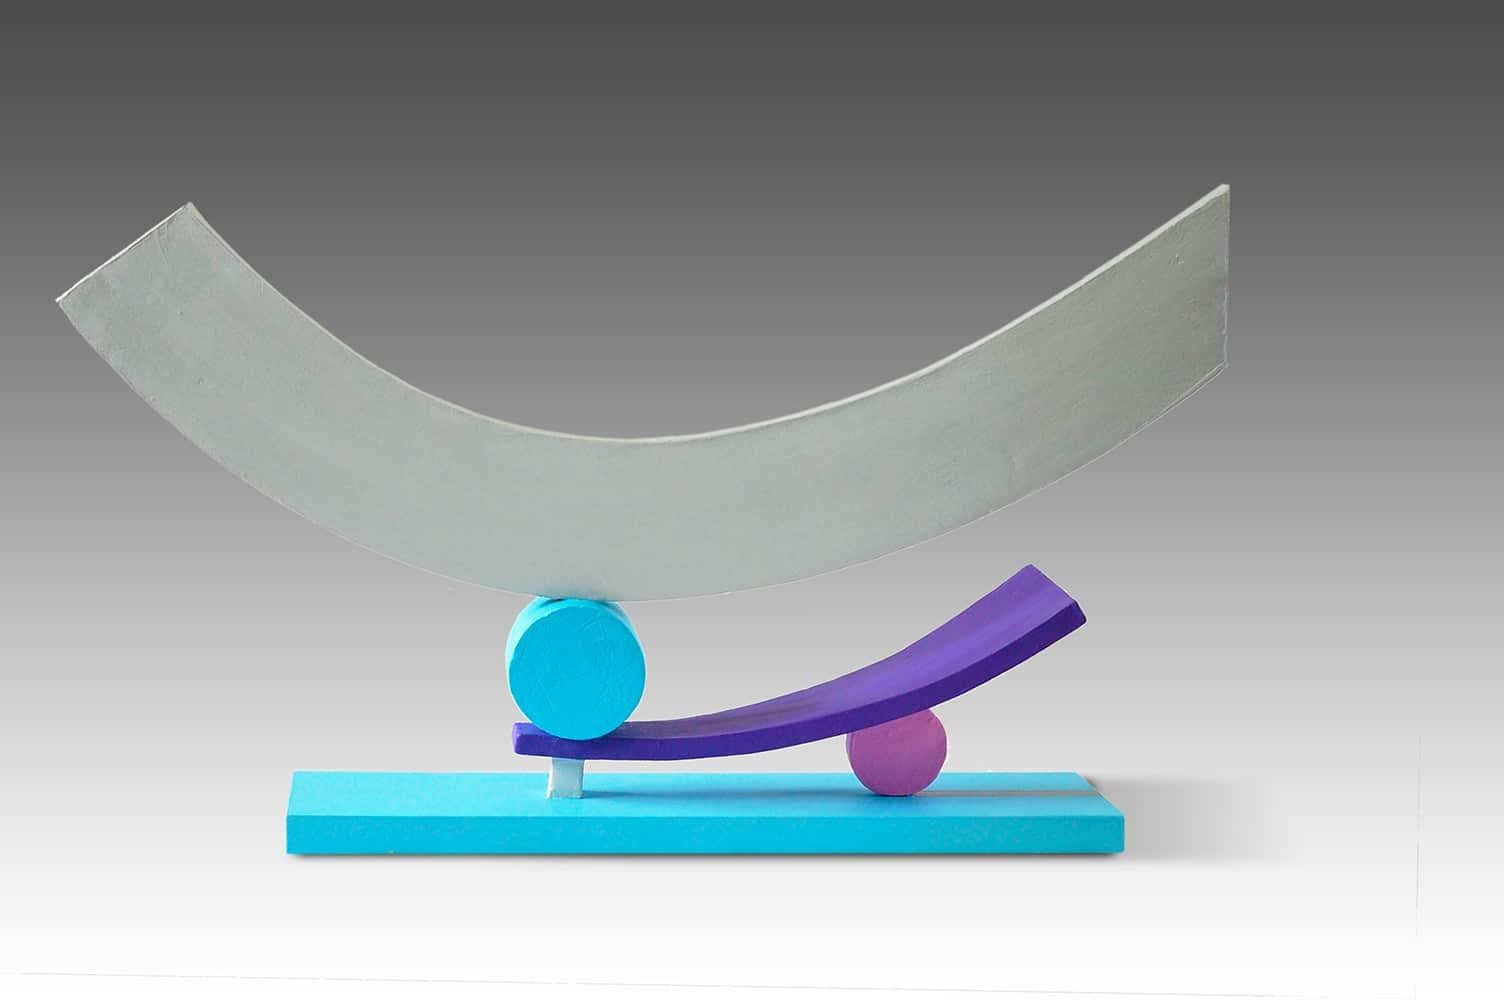 Balance is a unique fired clay constructed, painted and mounted on MDF sculpture by contemporary artist Patricia Volk, dimensions are 33 × 56 × 10 cm (13 × 22 × 3.9 in). 
The sculpture is signed and comes with a certificate of authenticity.